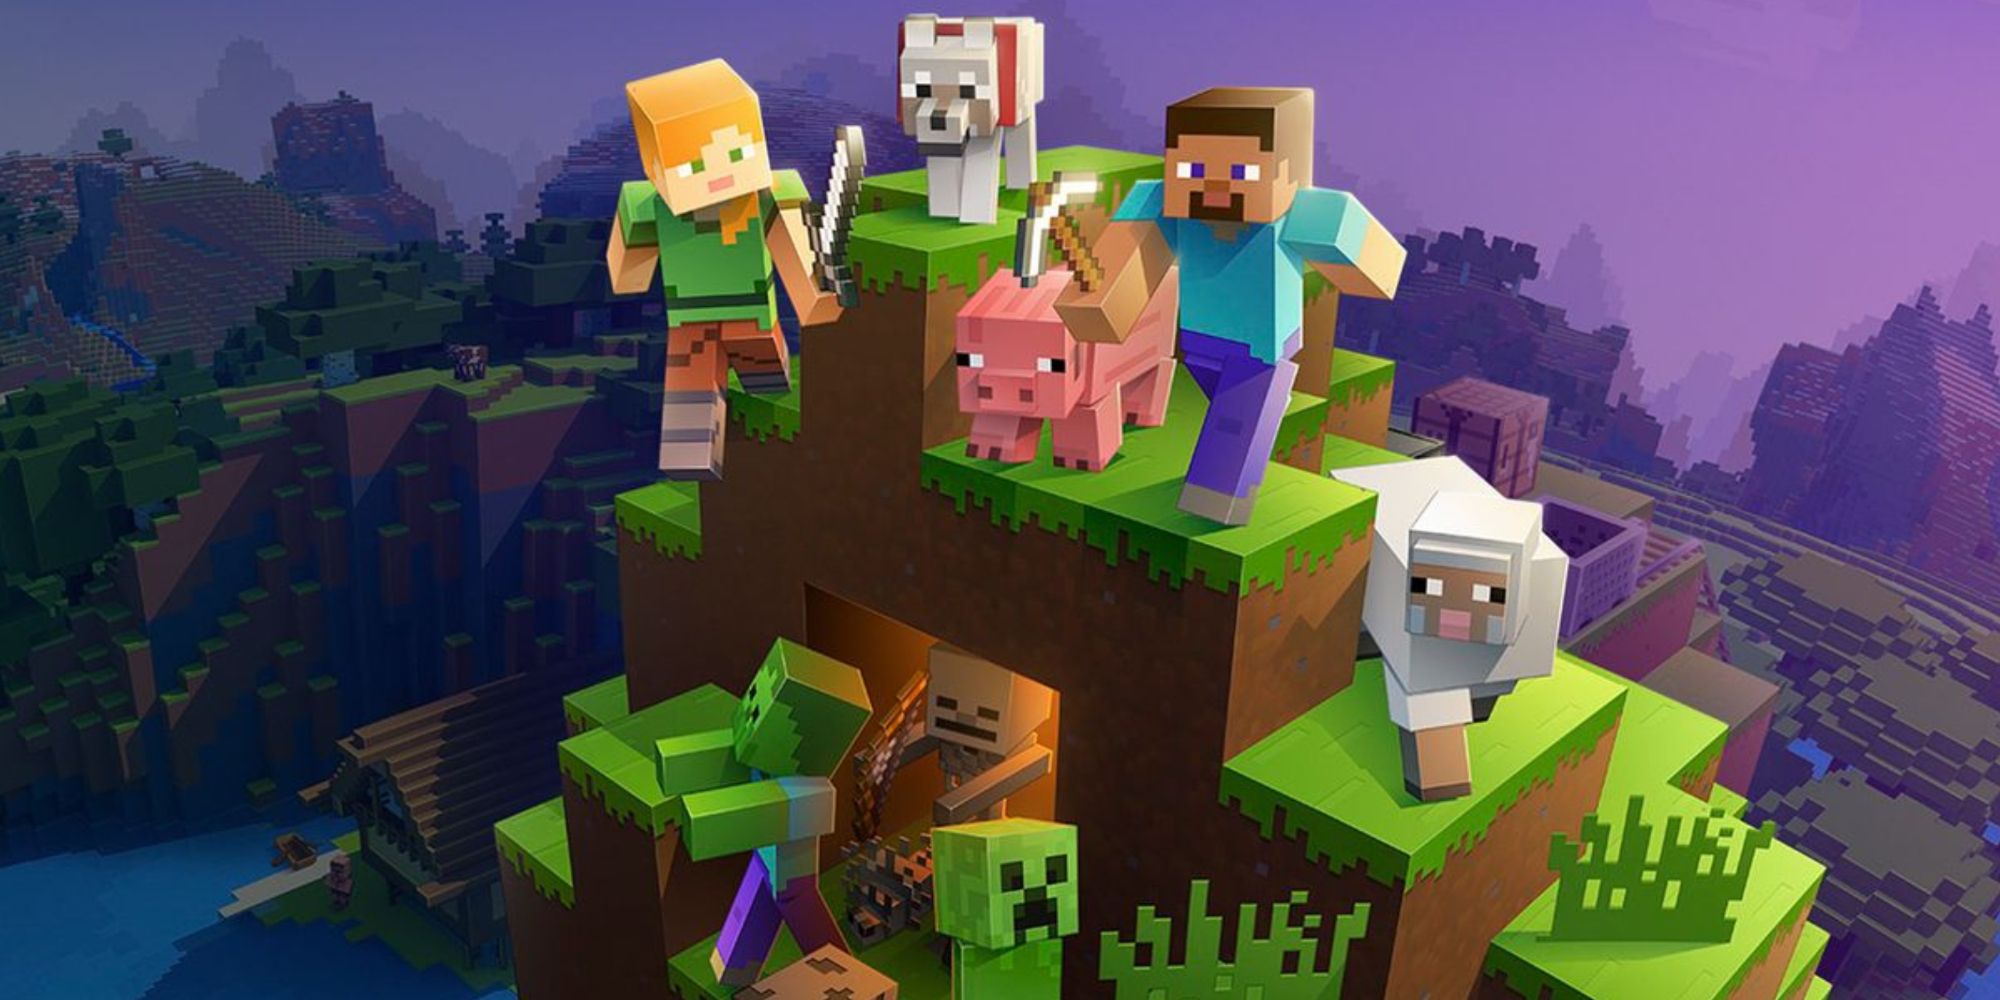 Promotional Art for Minecraft